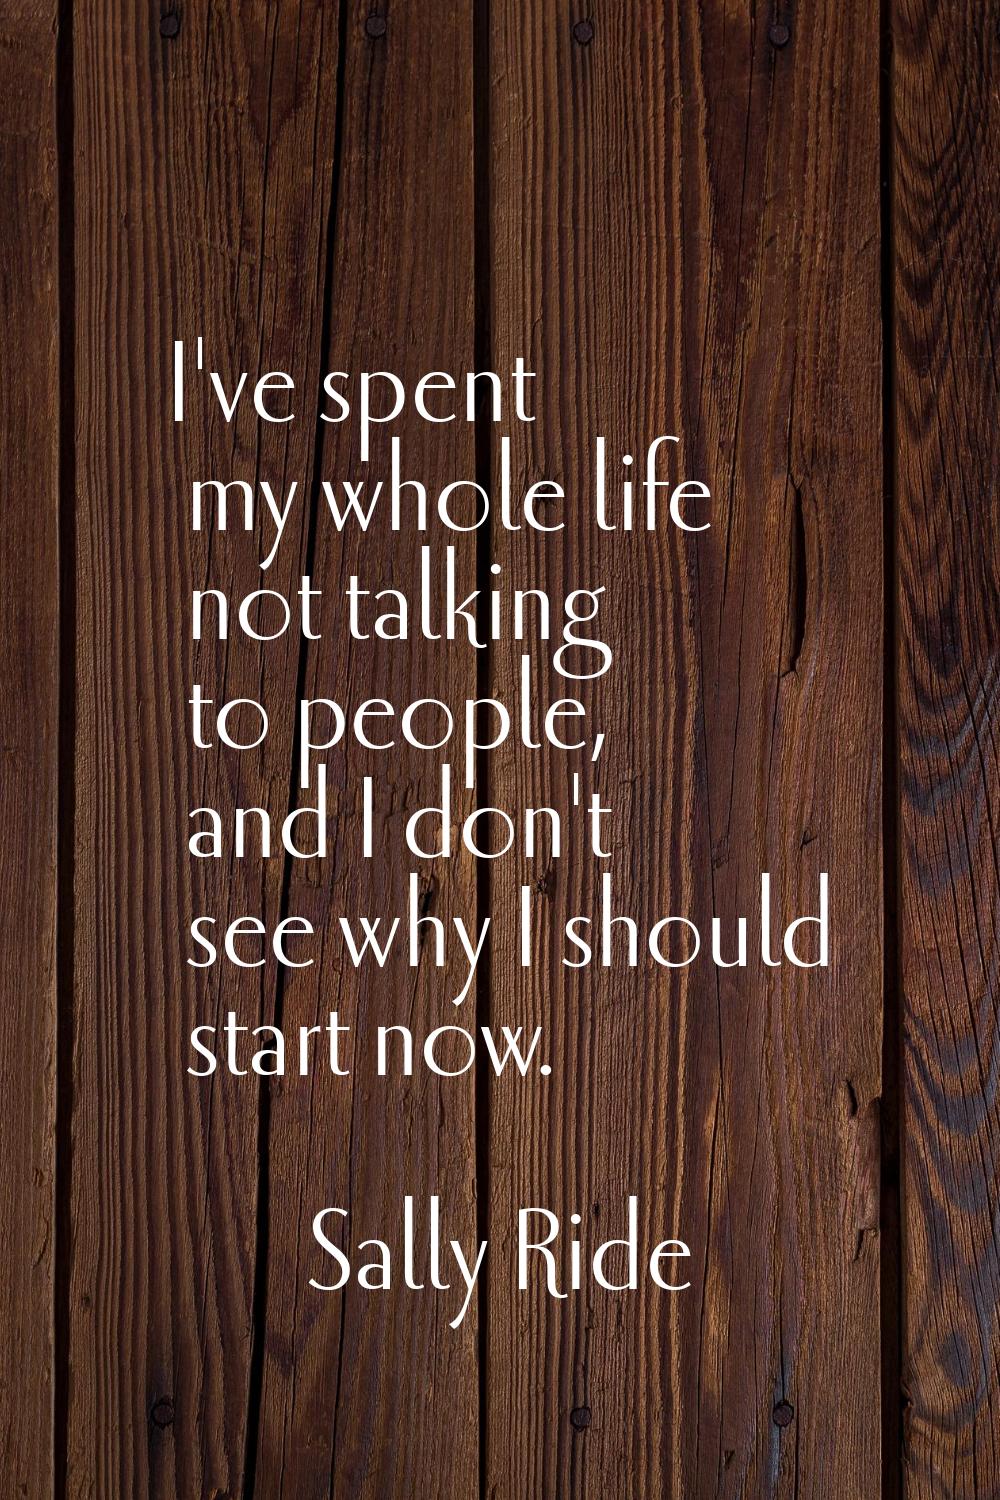 I've spent my whole life not talking to people, and I don't see why I should start now.